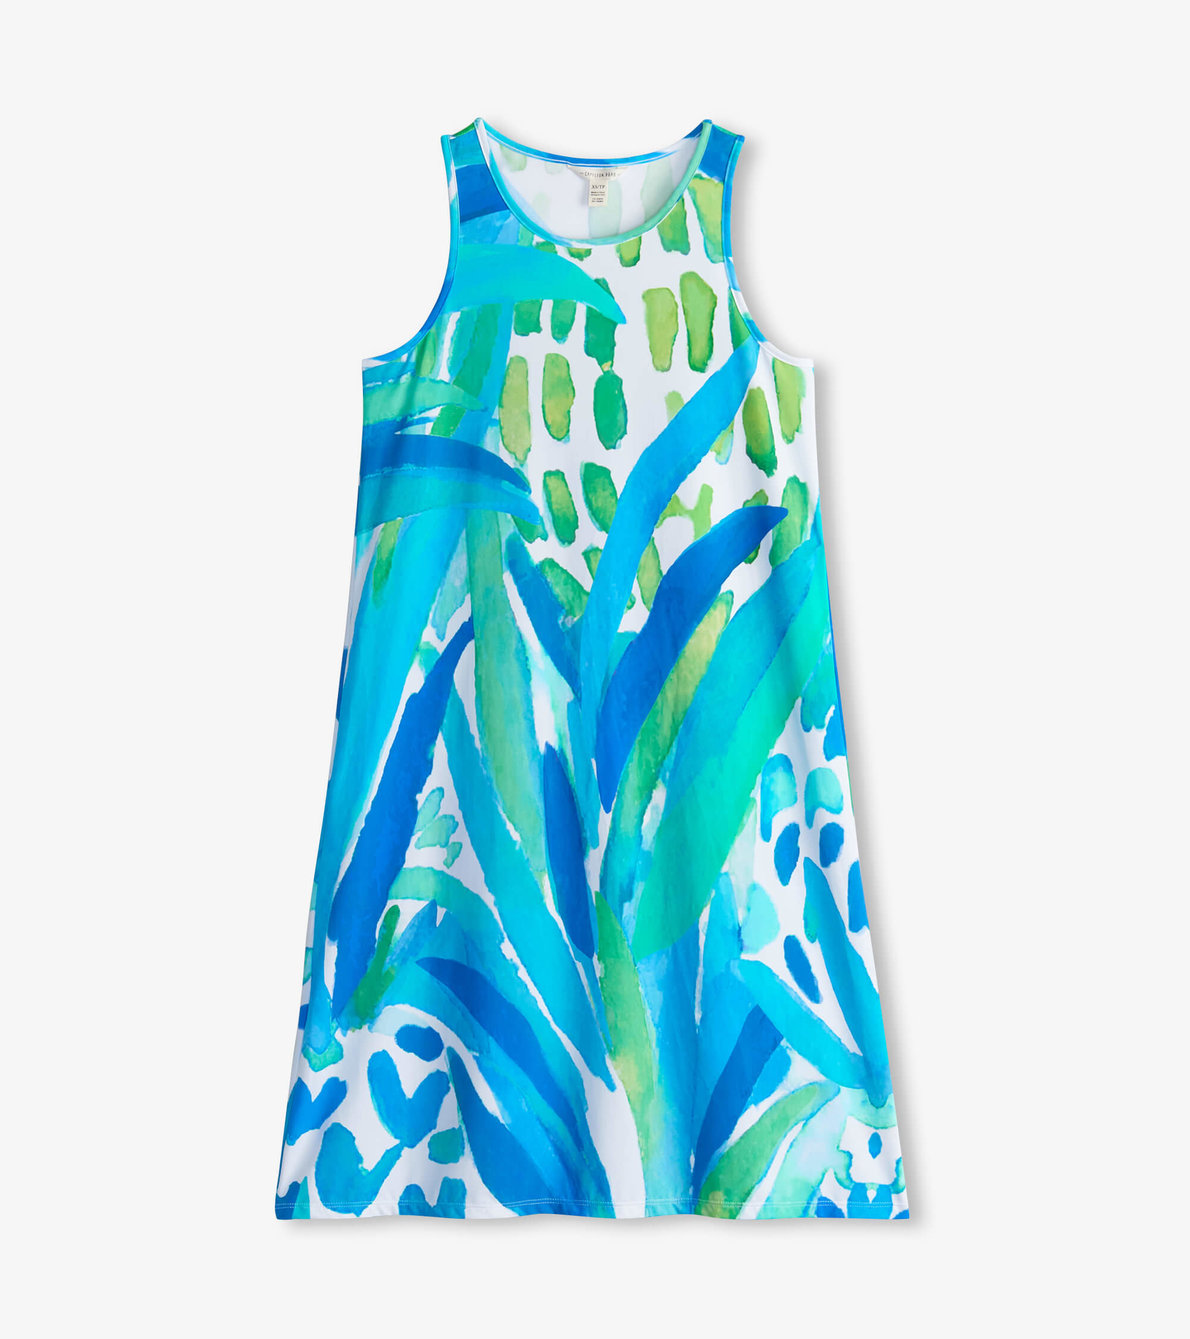 View larger image of Women's Painted Pineapple Summer Dress